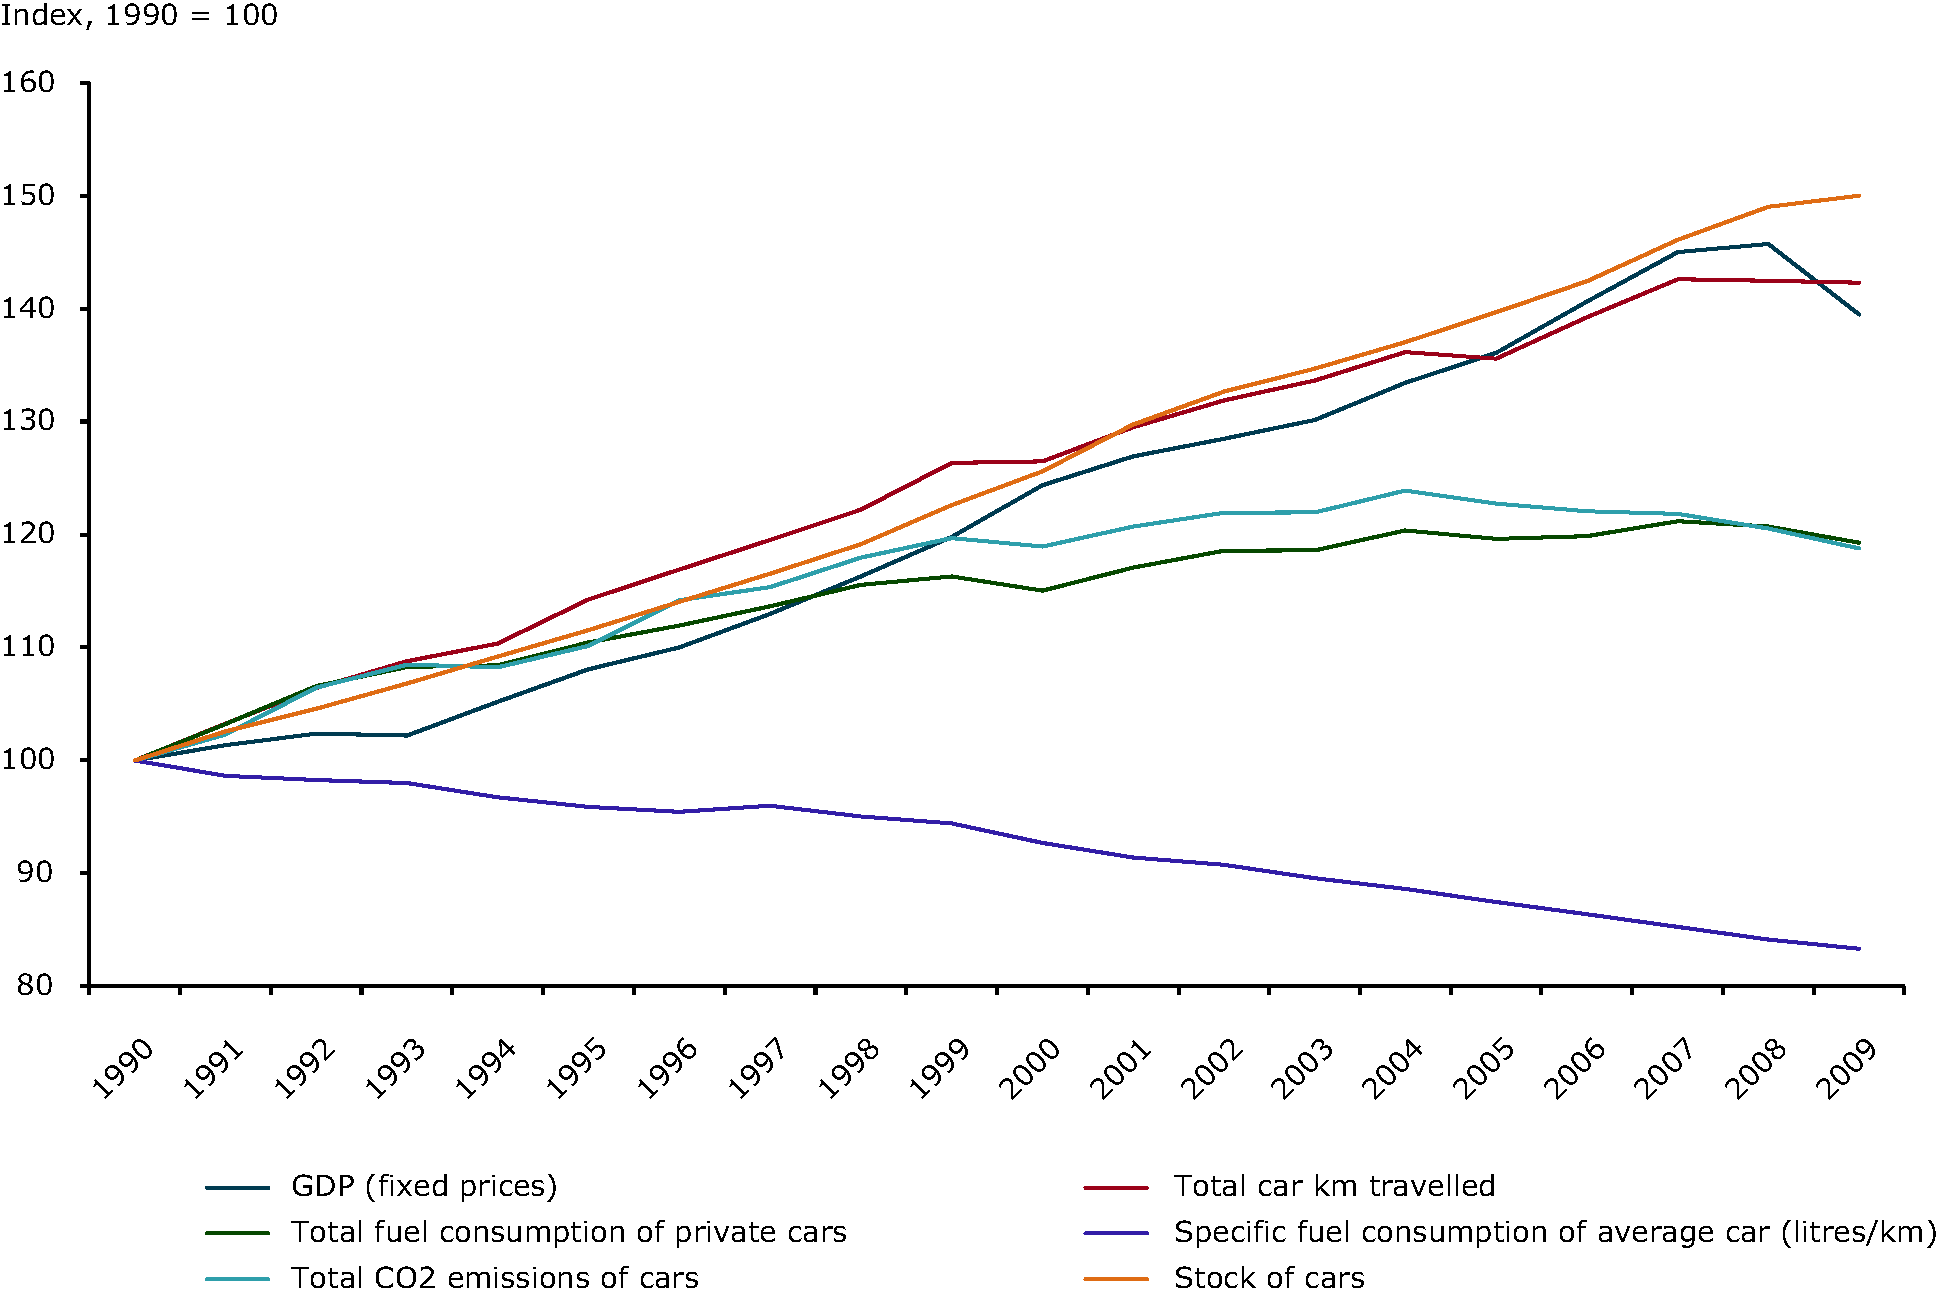 Developments in fuel efficiency of an average car alongside trends in private car ownership and GHG emissions 